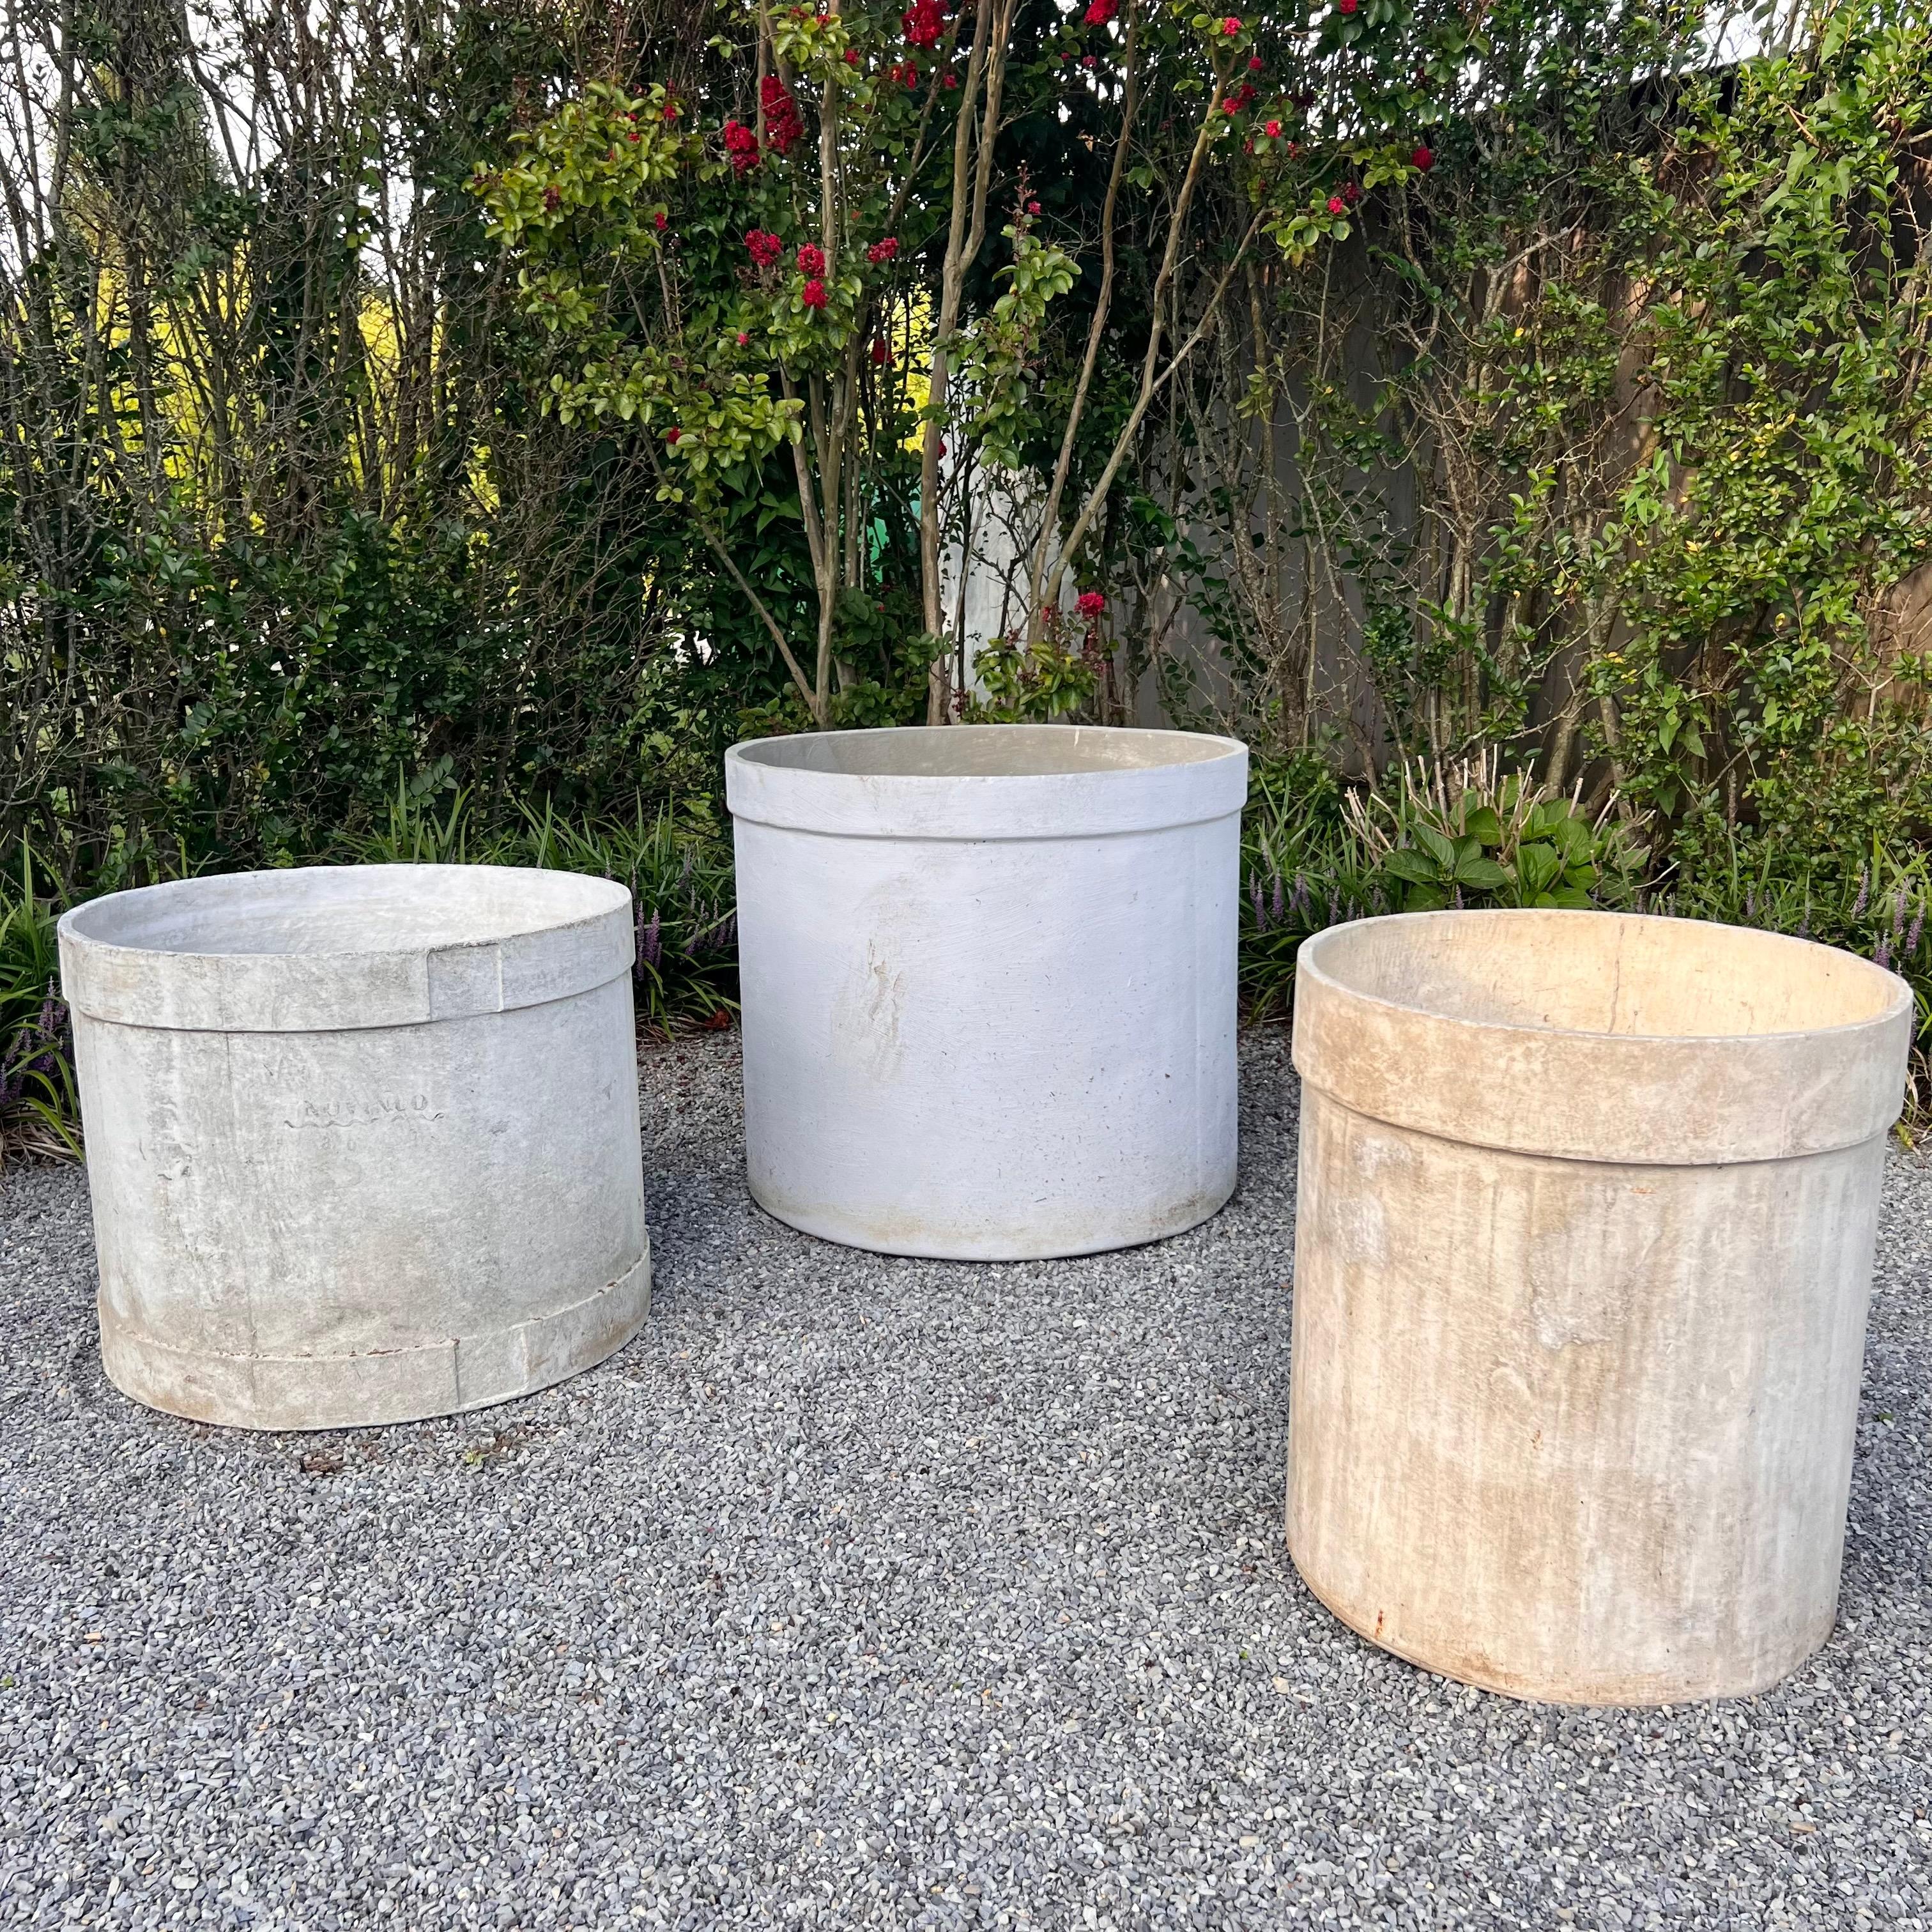 Monumental Cylindrical Concrete Tree Planter, 1960s Switzerland For Sale 2